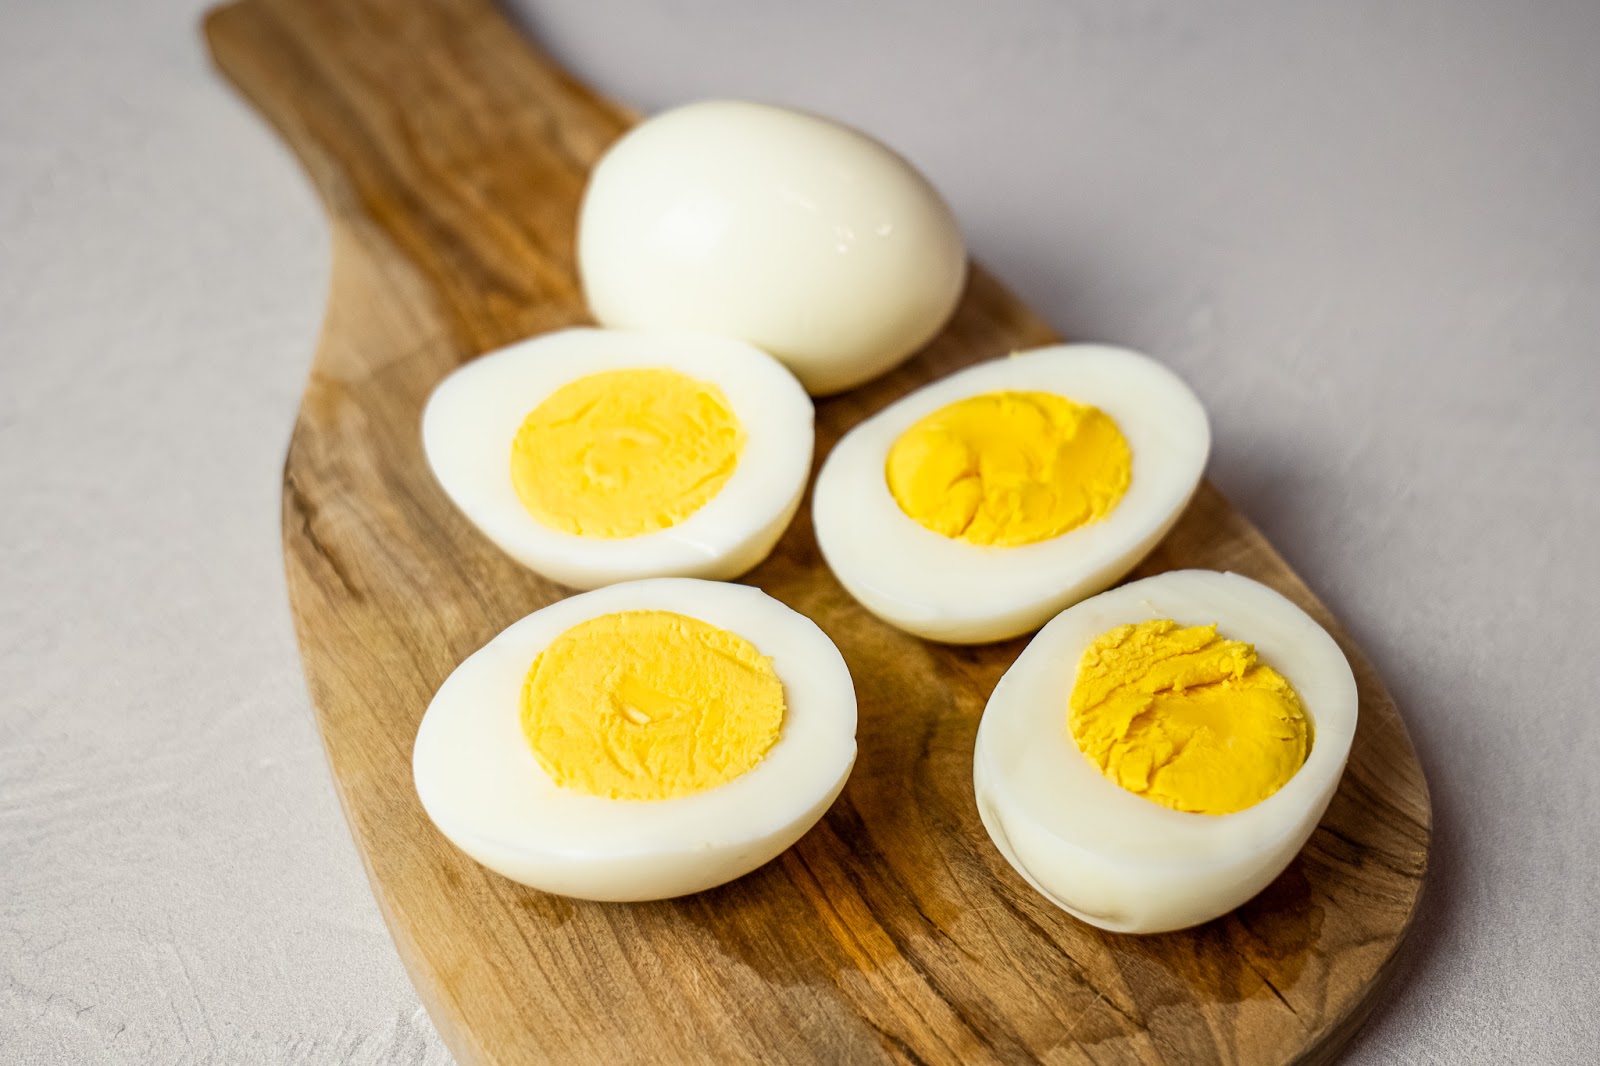 all-you-need-to-know-about-eggs-d710a880acb6a5832dff8aa9